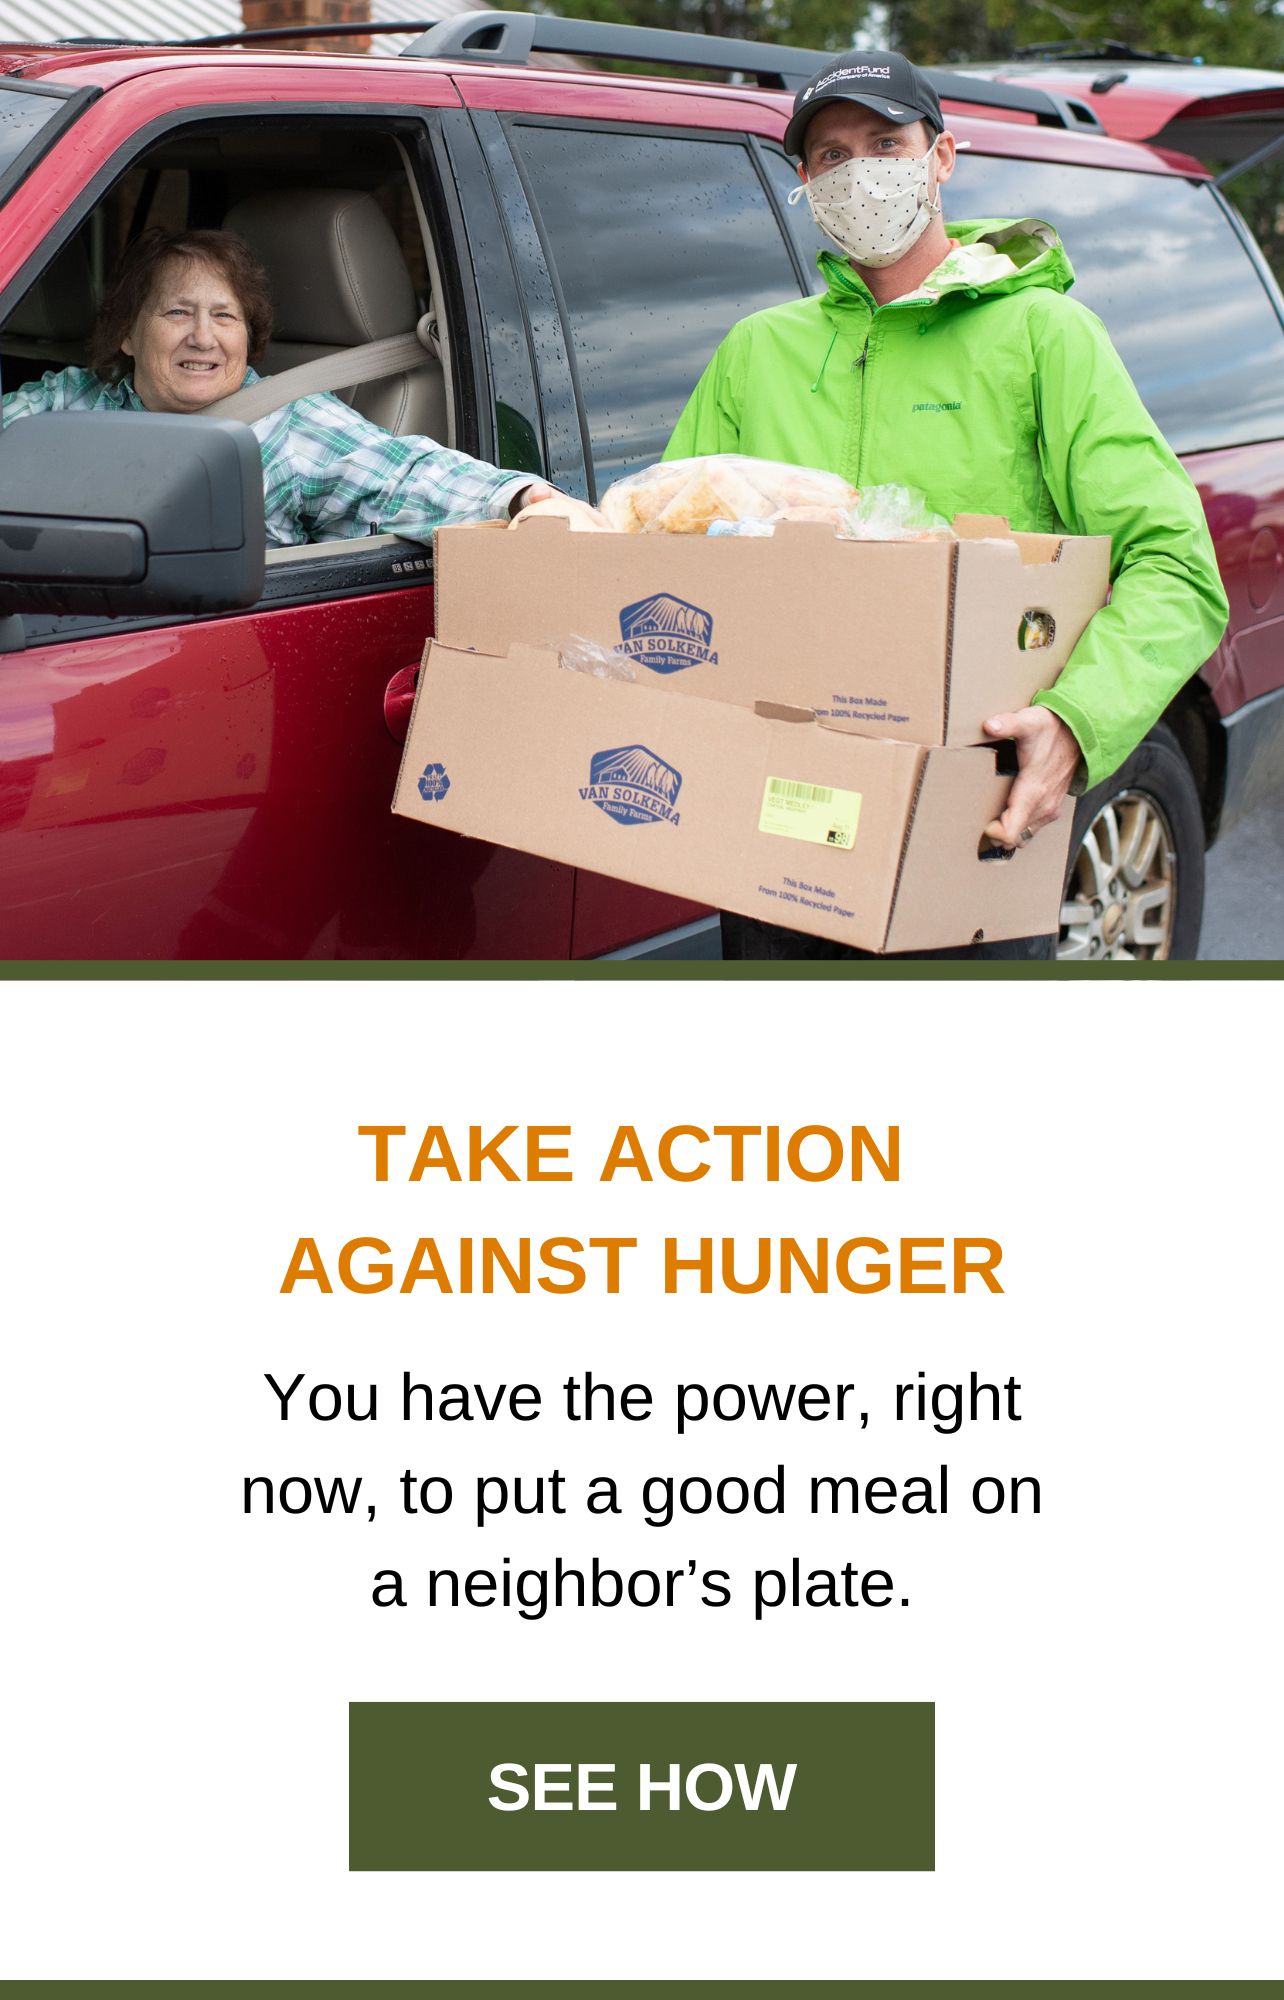 Take action against hunger. You have the power, right now, to put a food meal on a neighbor's plate. See how.